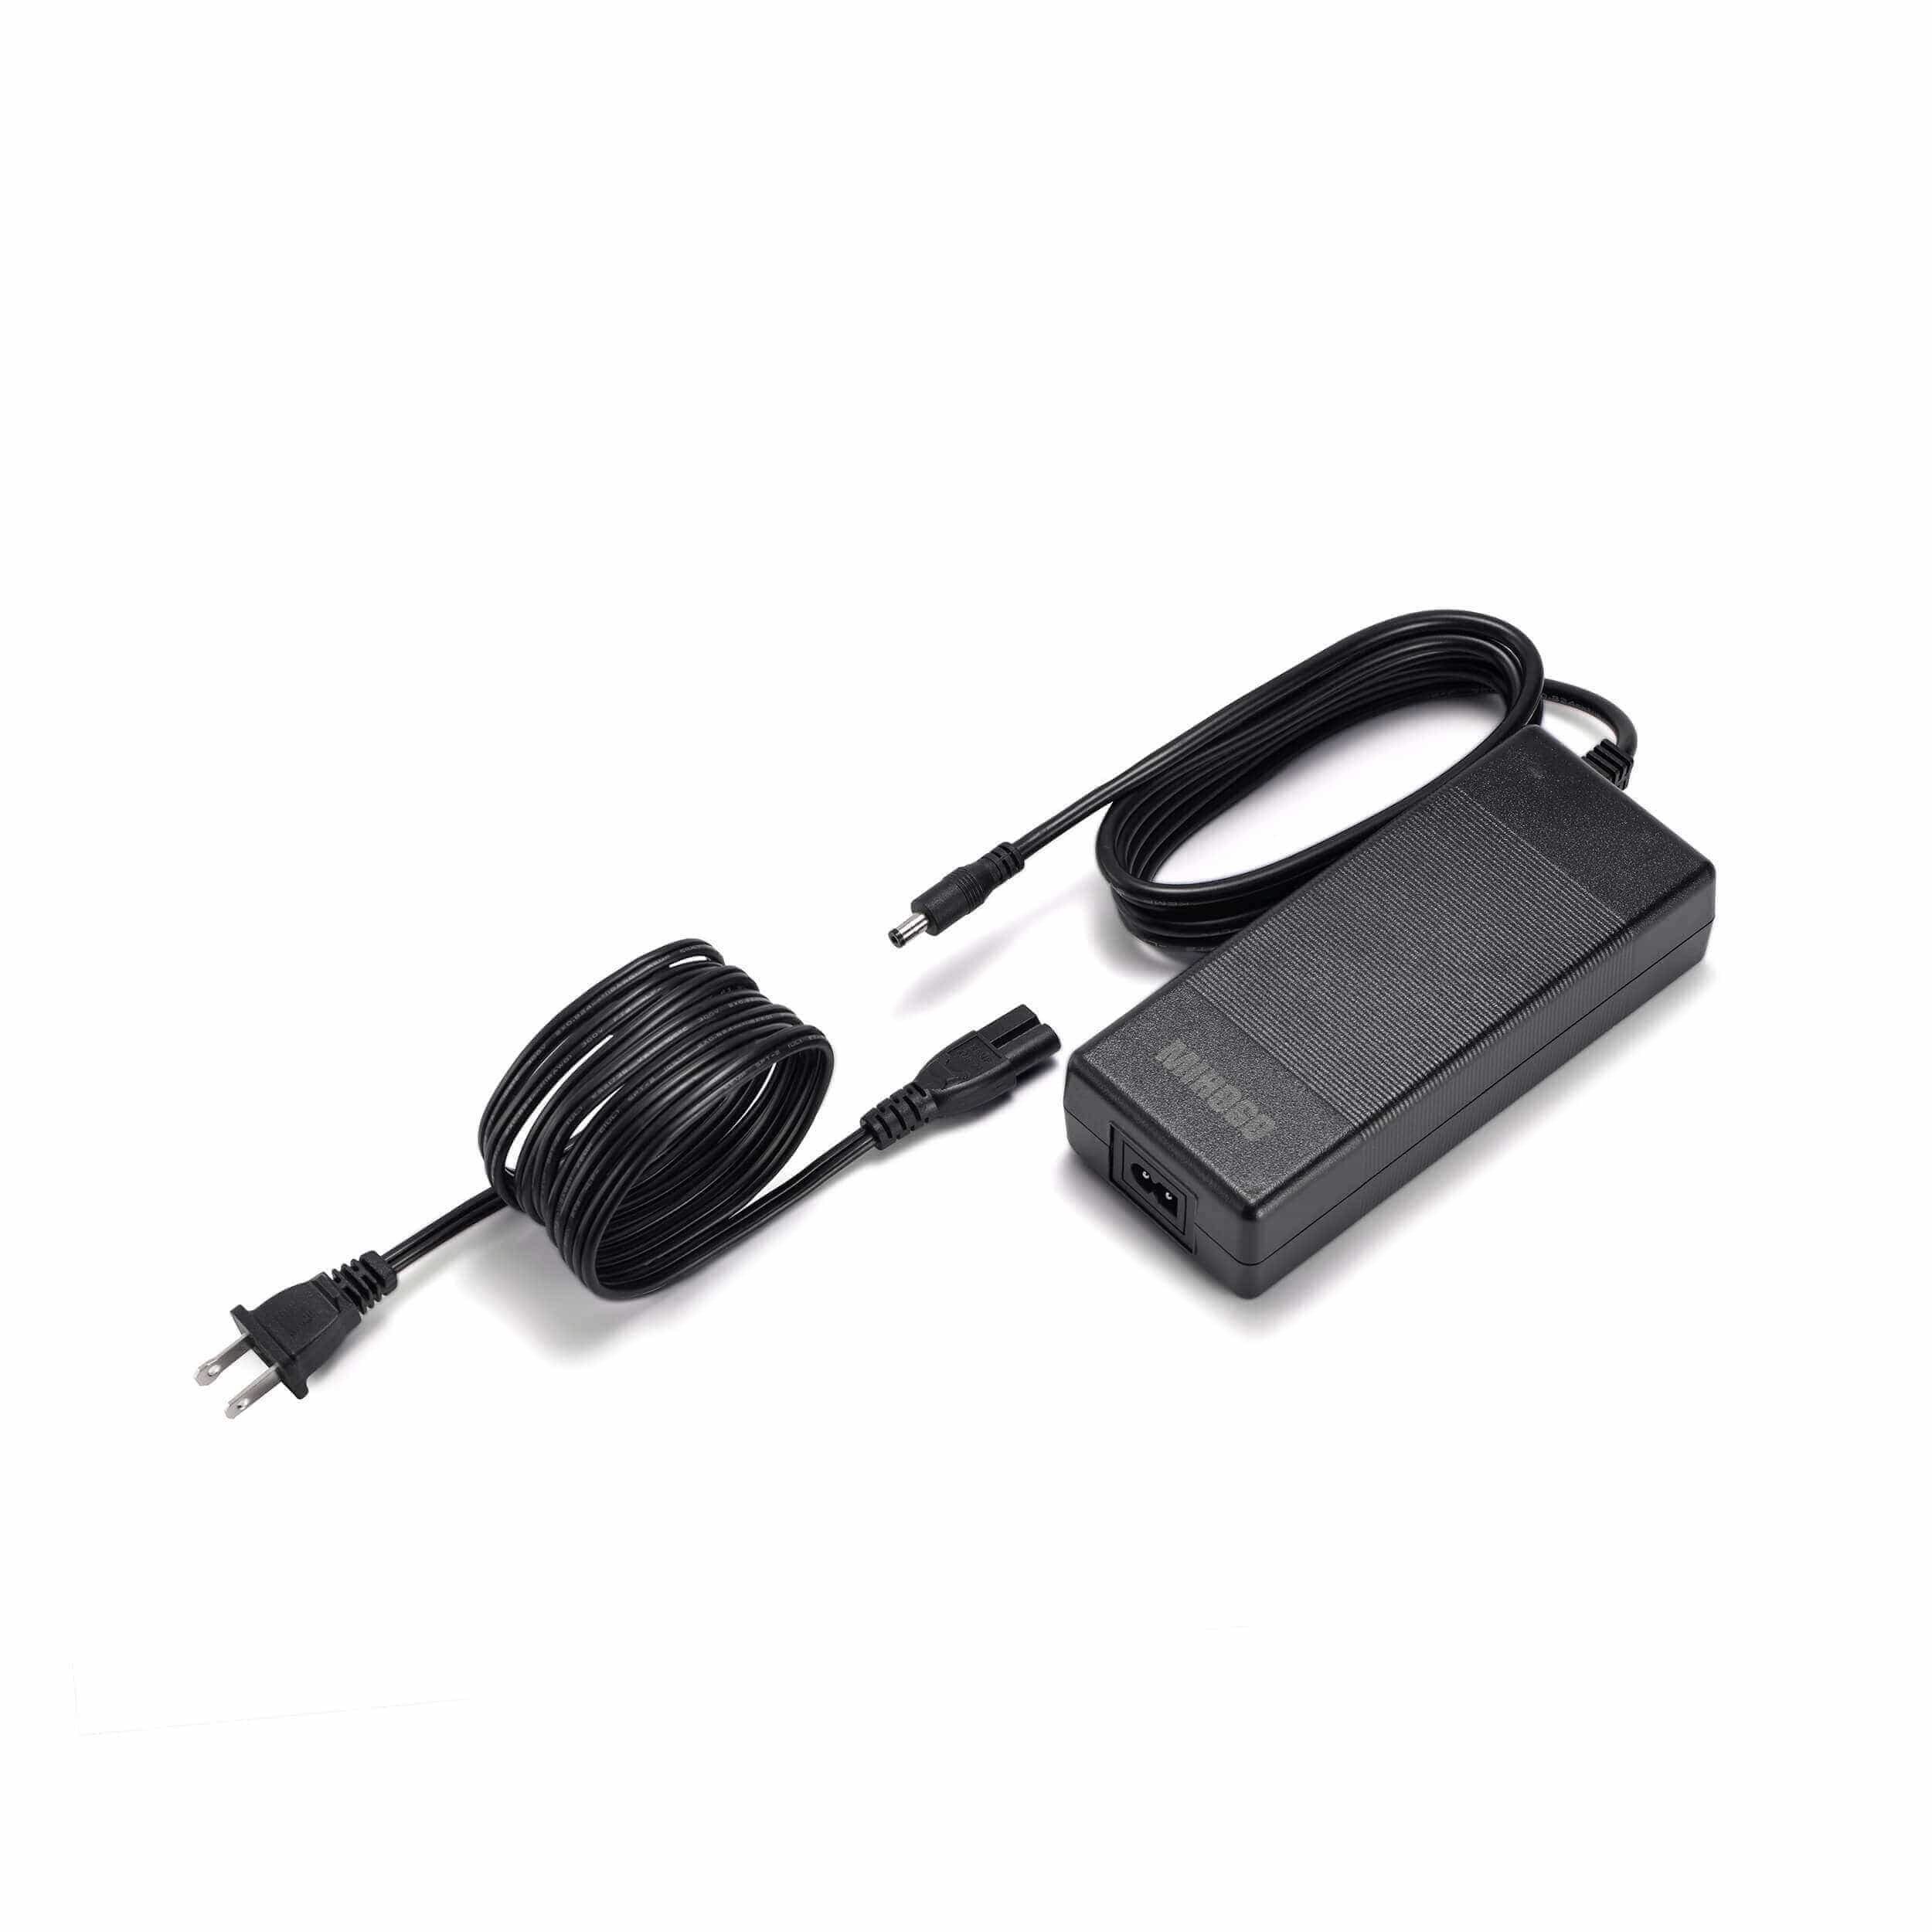 Mihogo Universal Charger